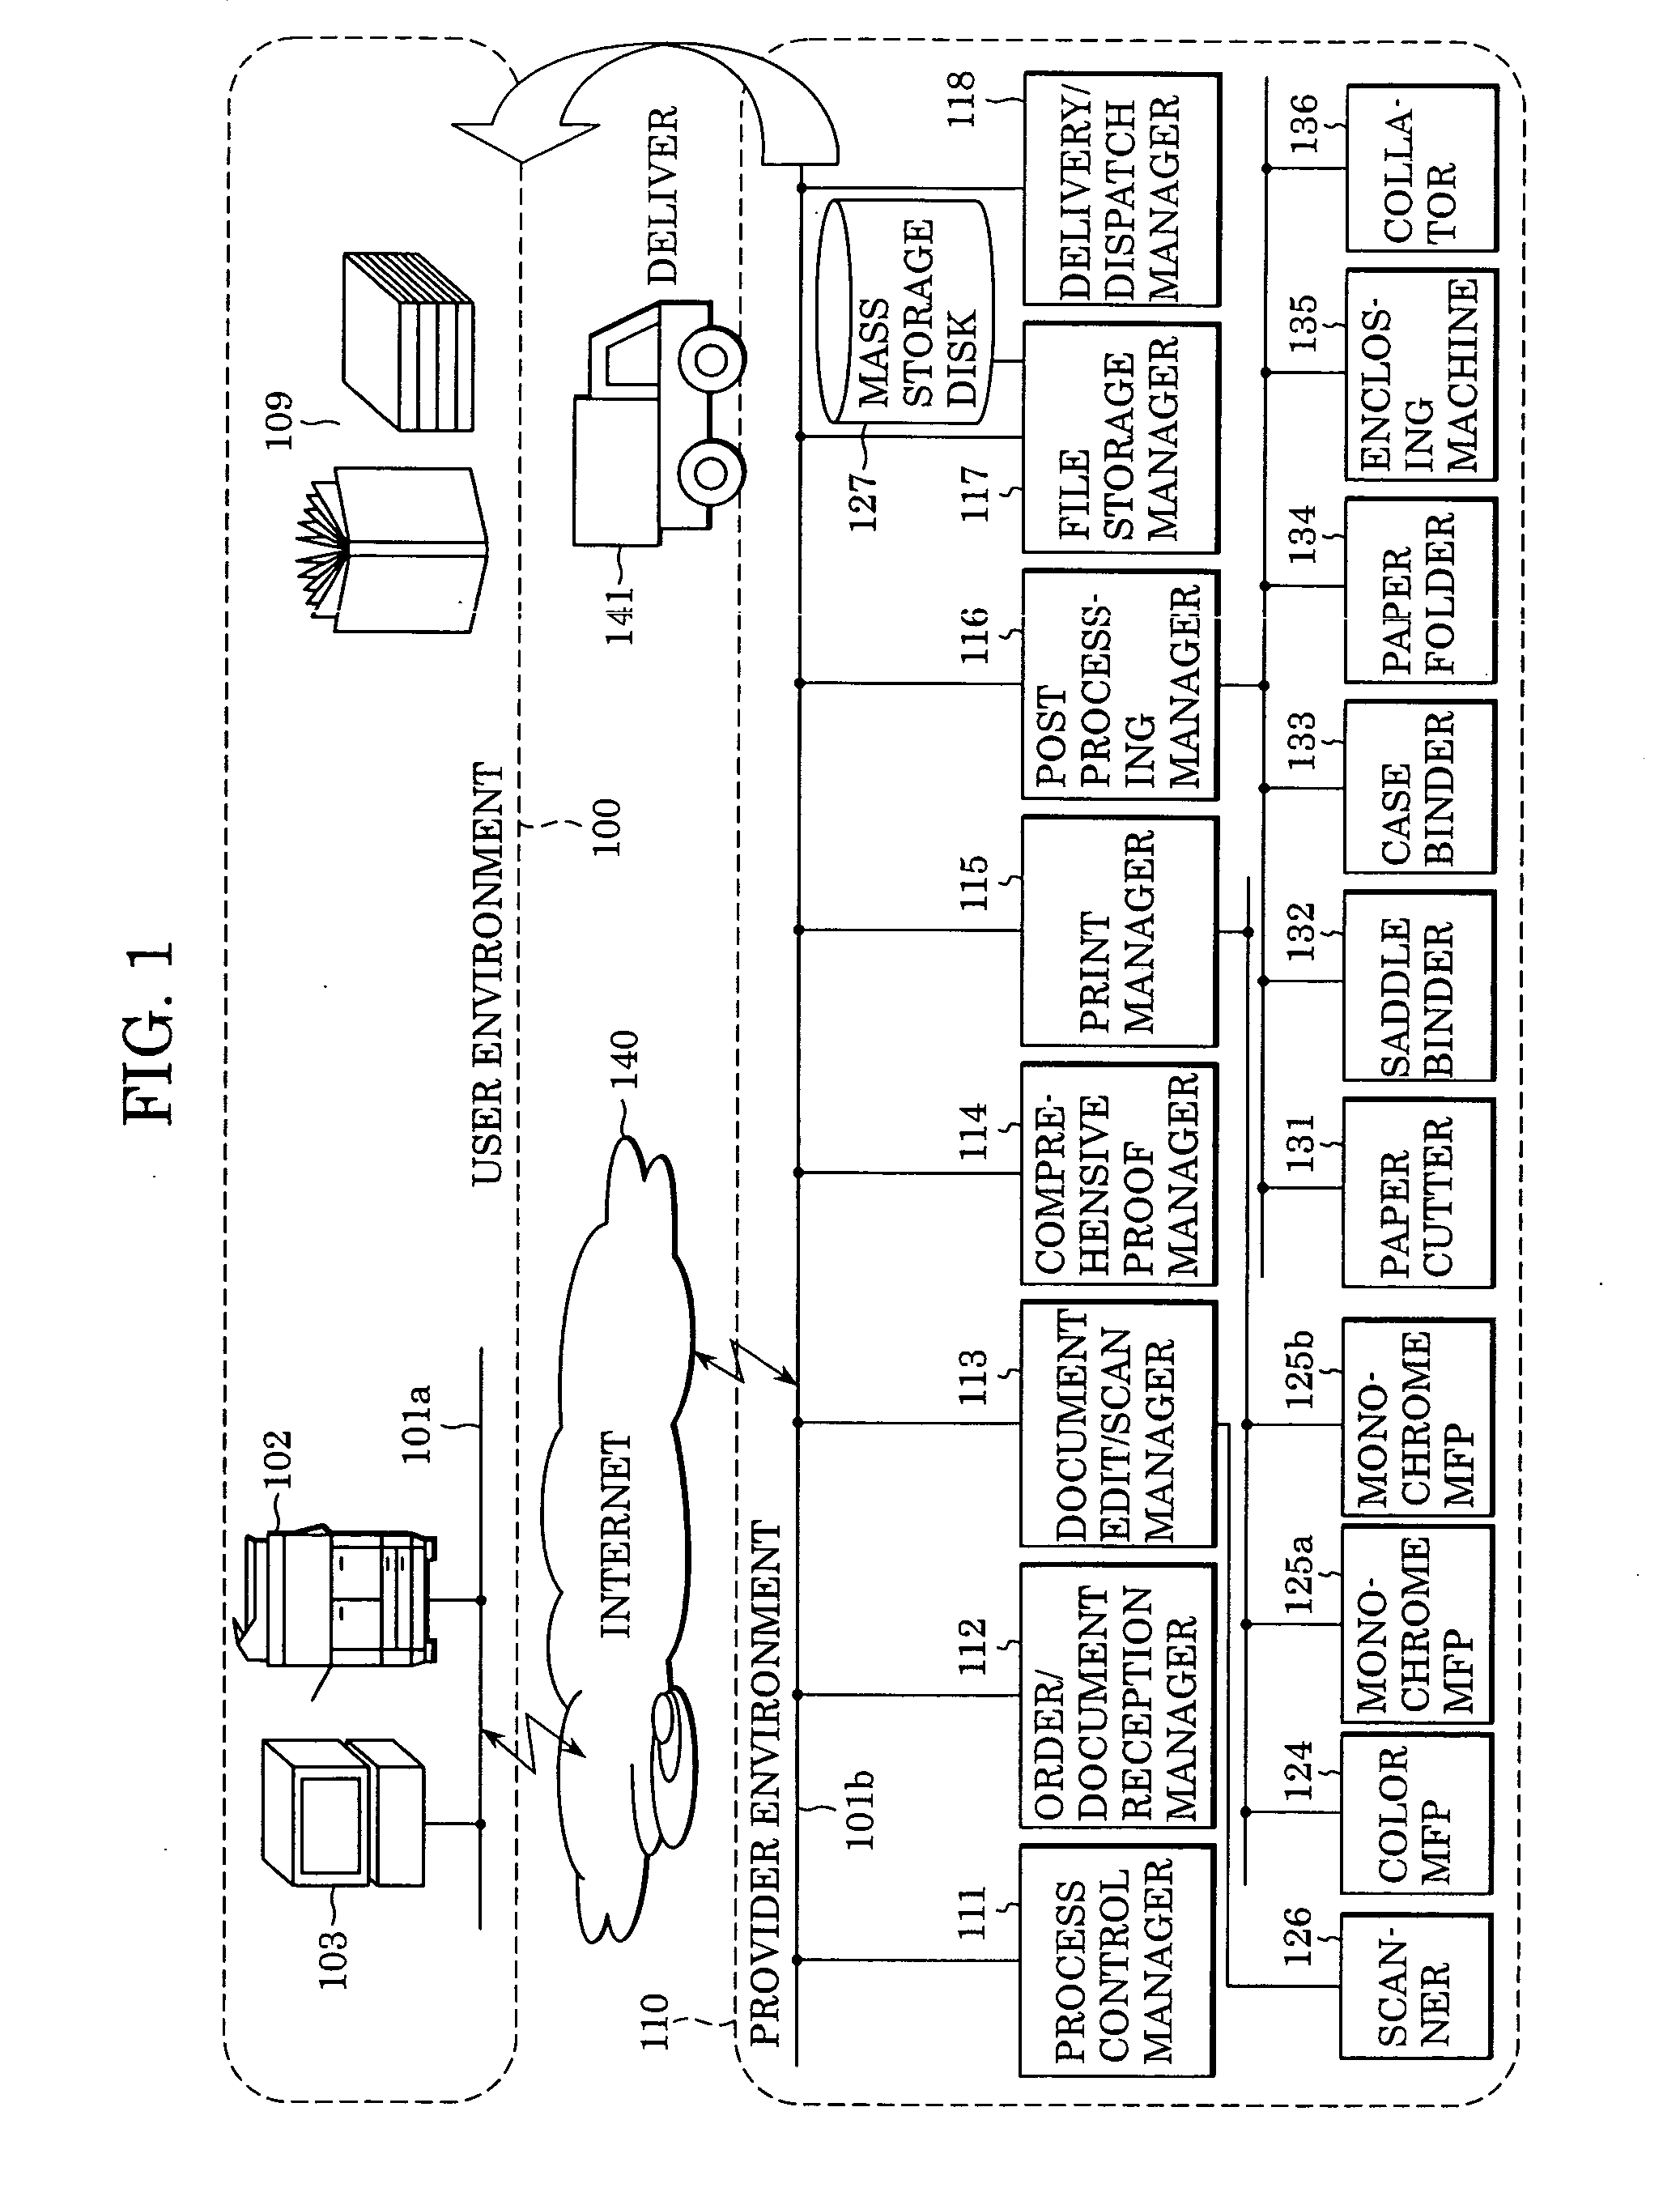 Image forming apparatus, image processing system, method of processing a job, method of controlling a job, and computer readable storage medium including computer-executable instructions